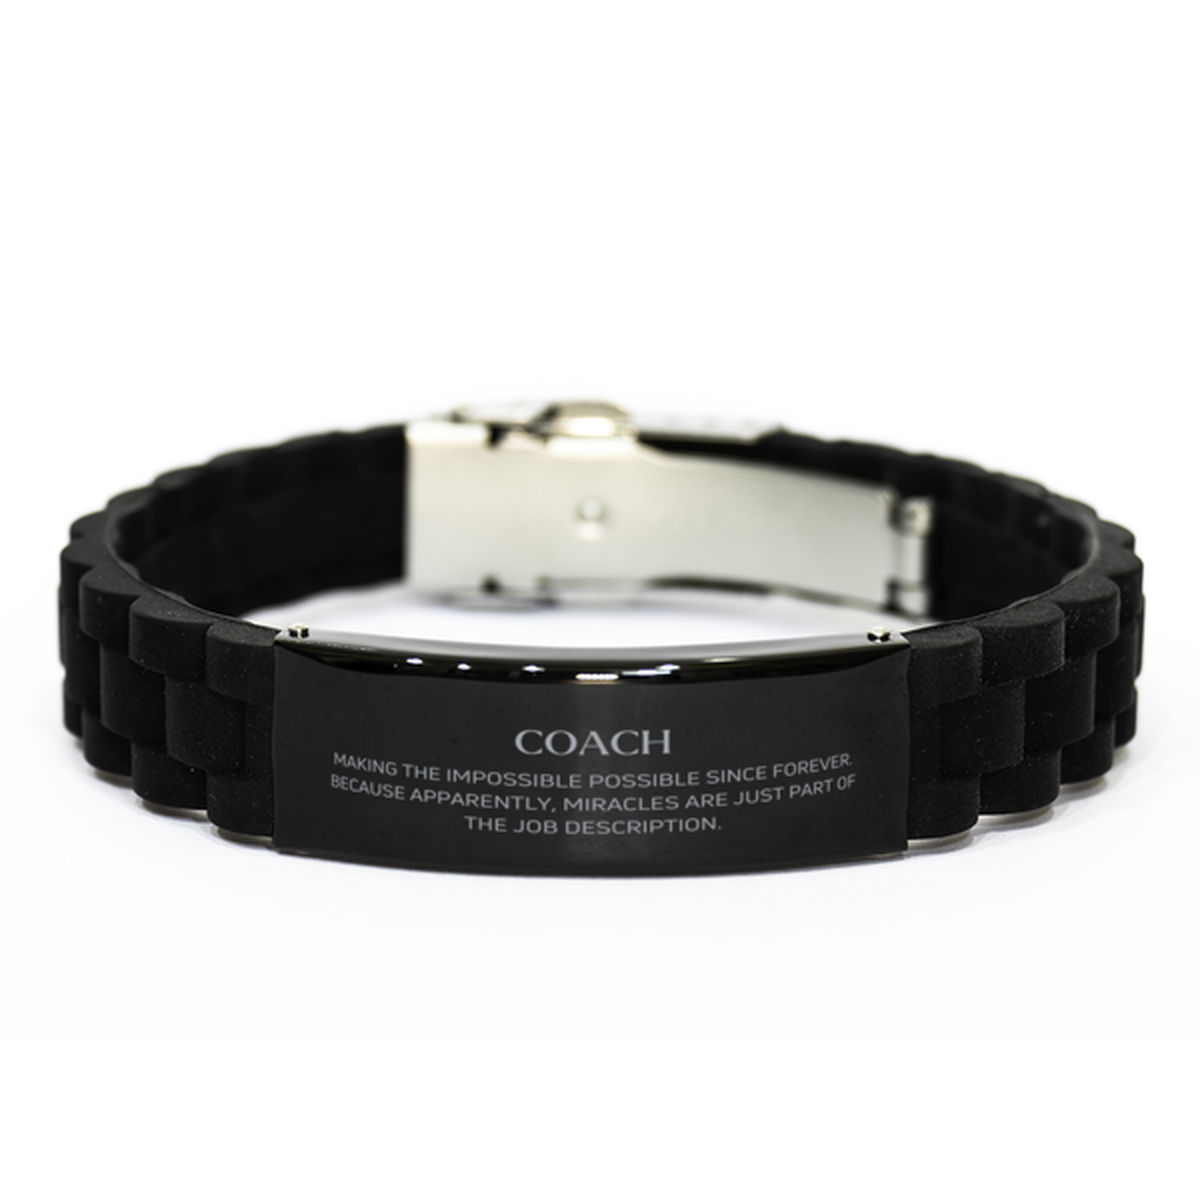 Funny Coach Gifts, Miracles are just part of the job description, Inspirational Birthday Black Glidelock Clasp Bracelet For Coach, Men, Women, Coworkers, Friends, Boss